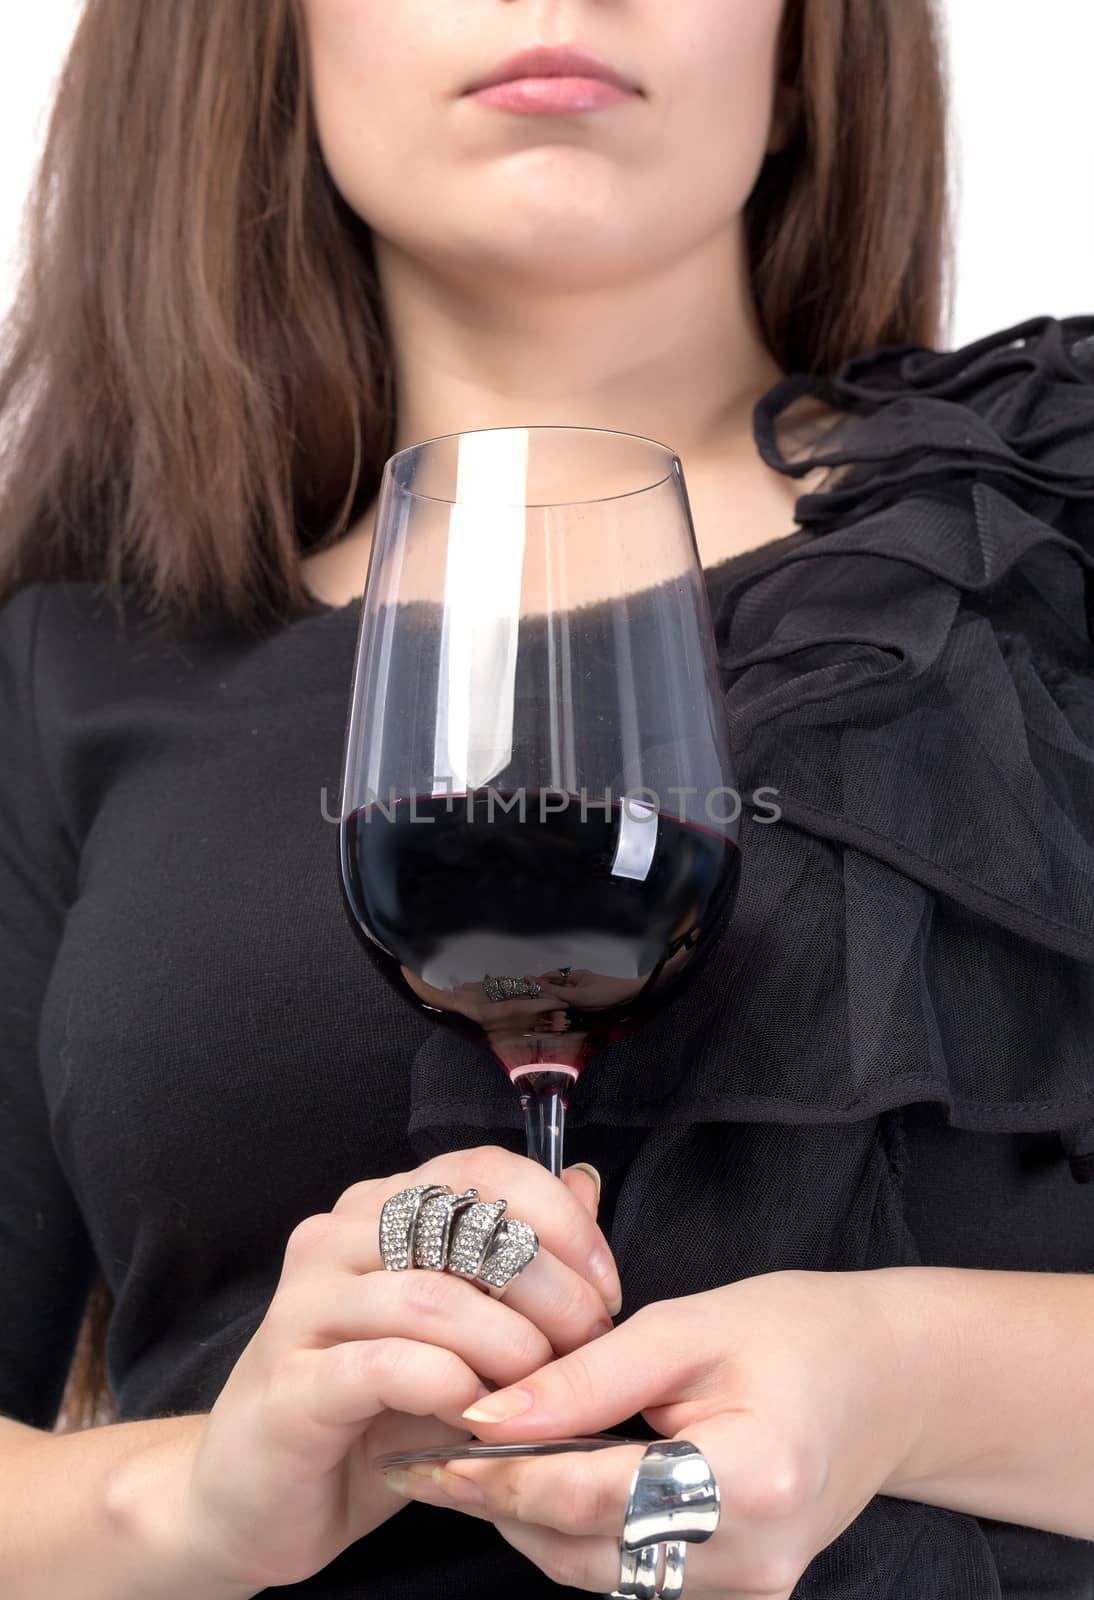 Young woman with red wine from a glass by Discovod